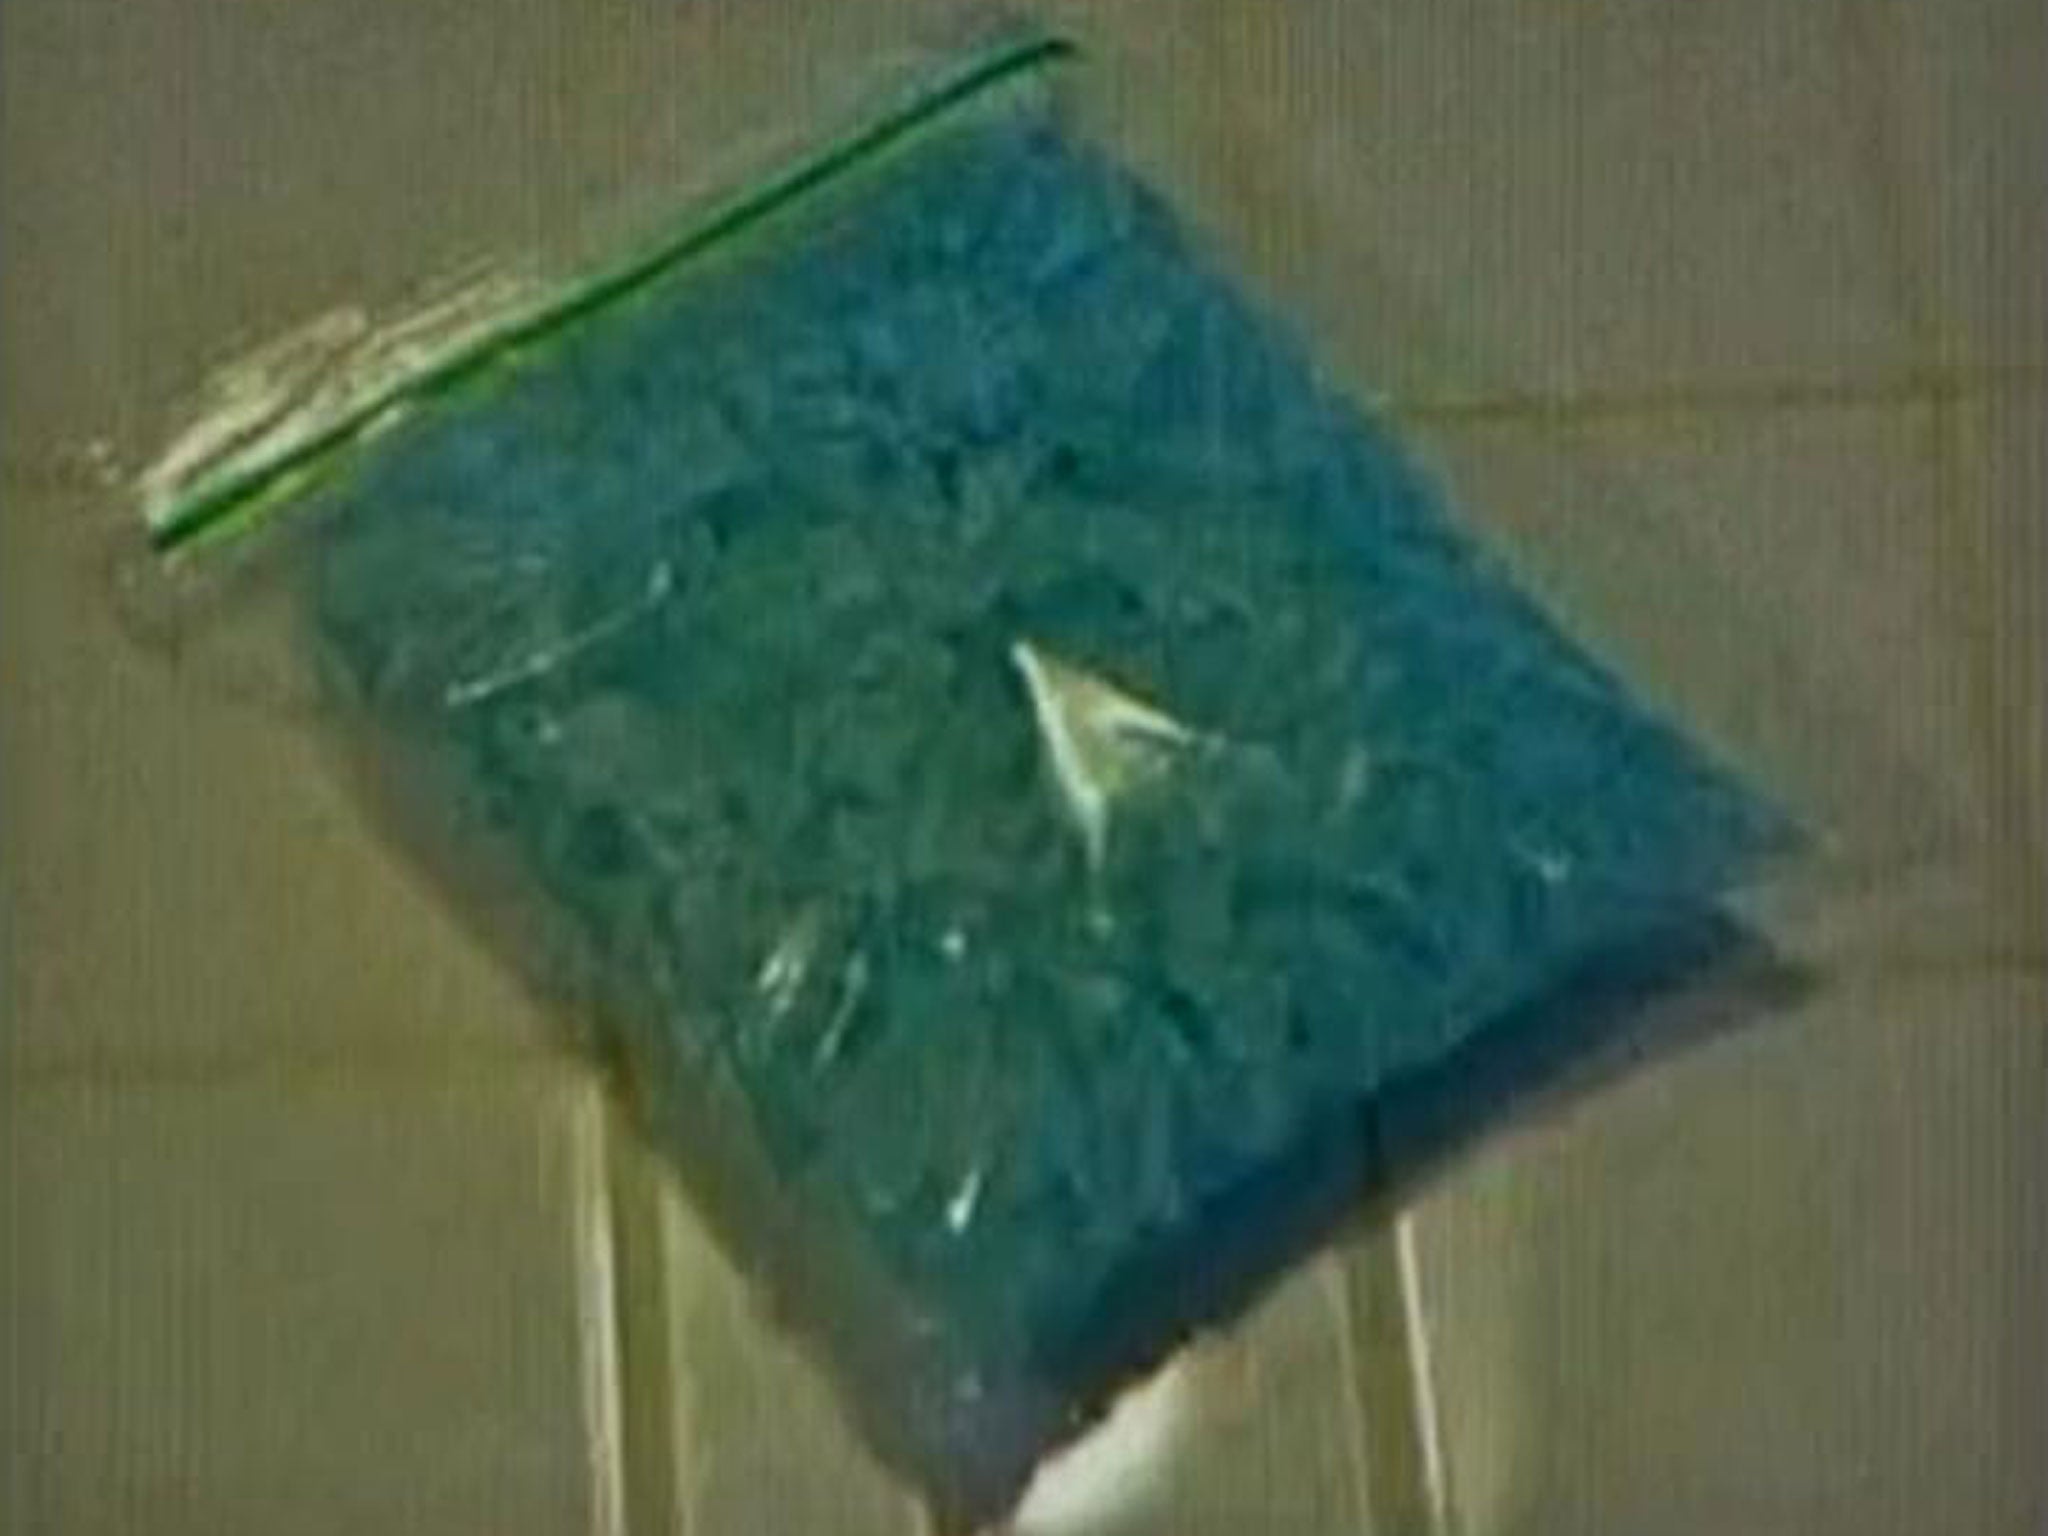 One of the bags of the blue crystal meth seized by agents in New Mexico